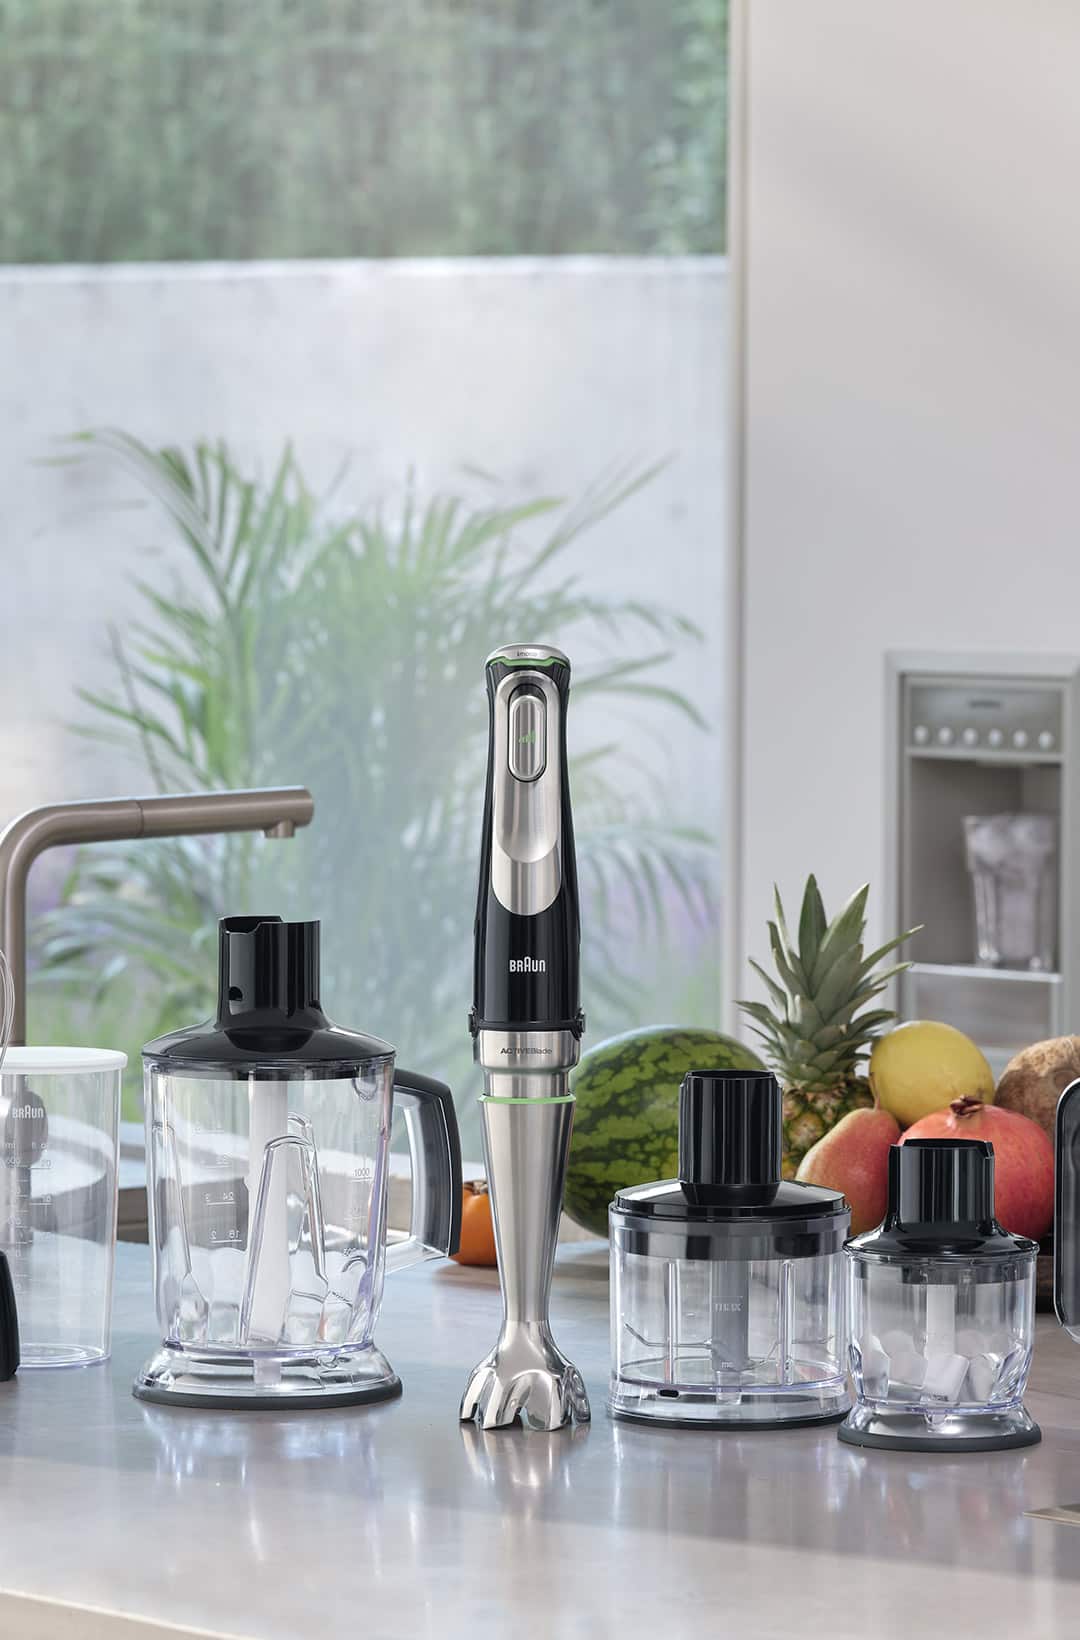 Braun Multiquick 9 hand blenders with all attachments